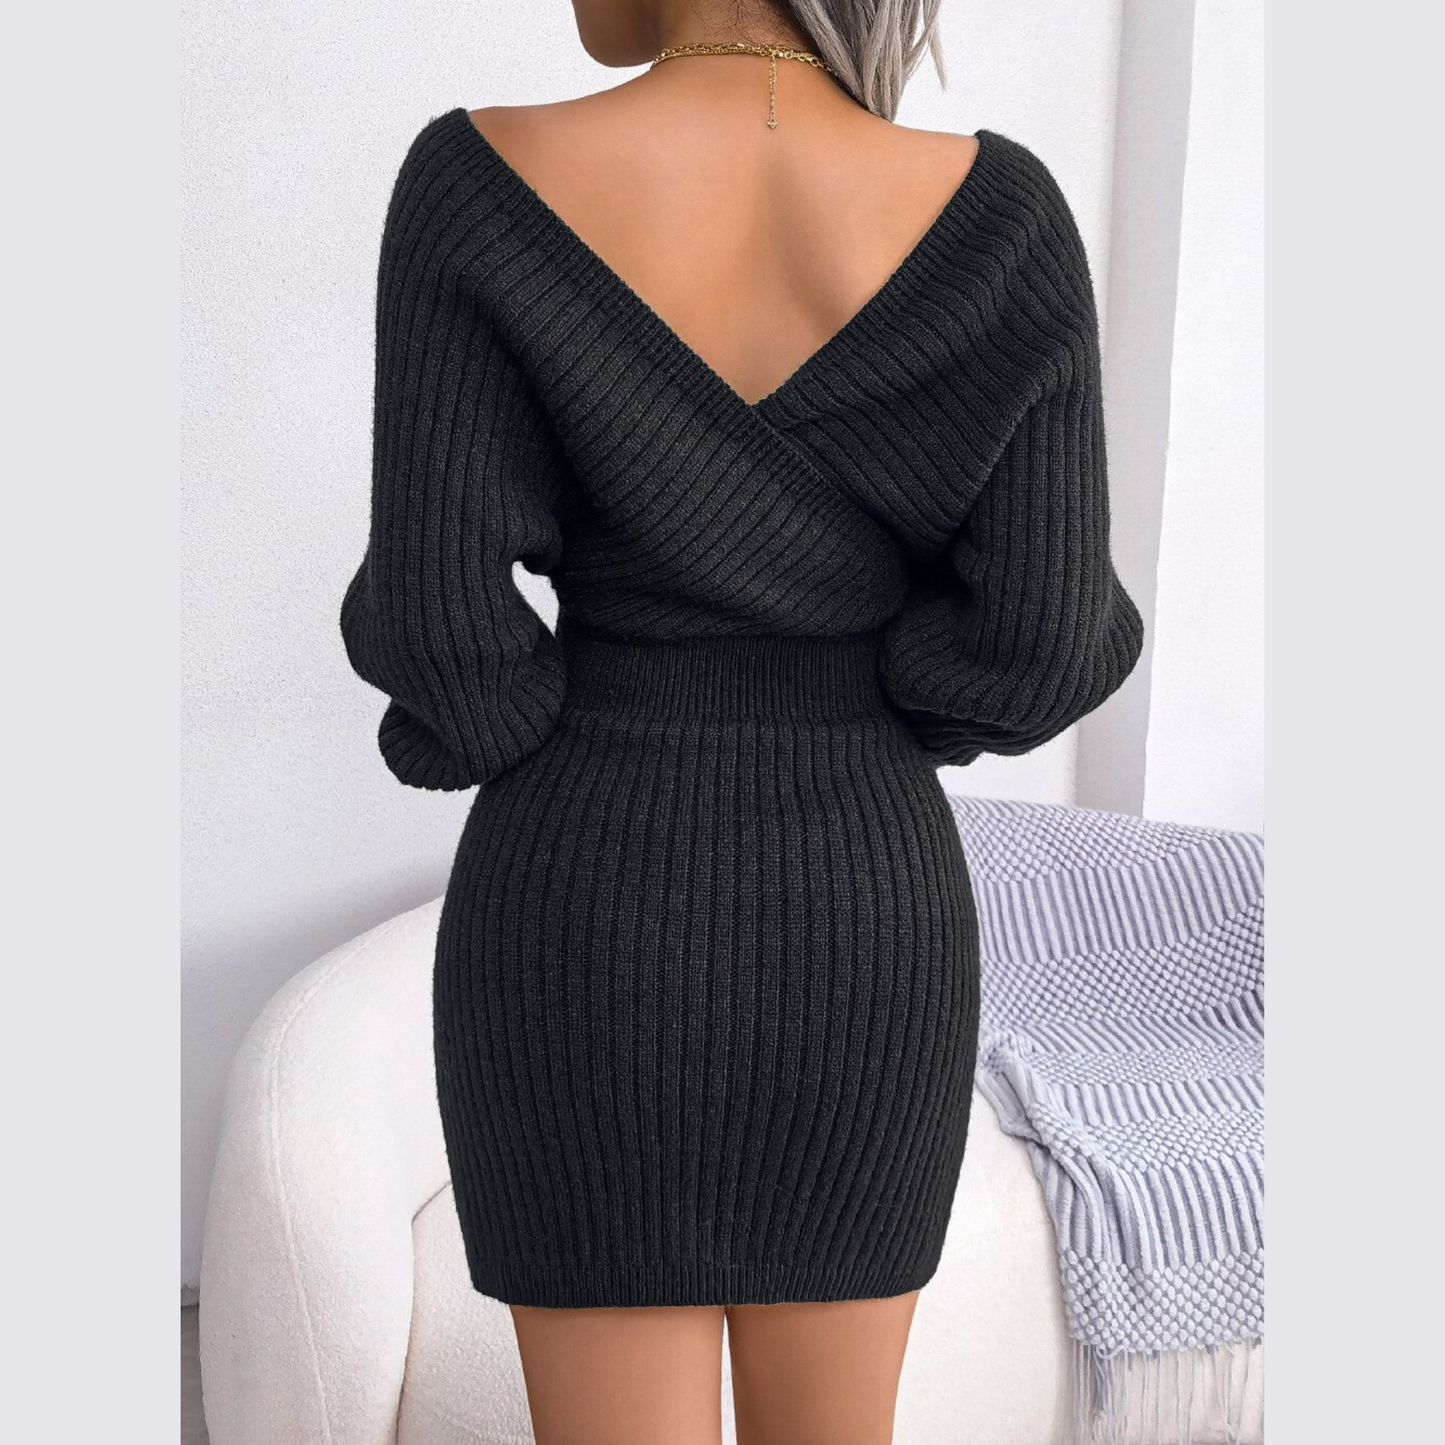 Tilly - Black Batwing Sleeves Ribbed Sweater Dress